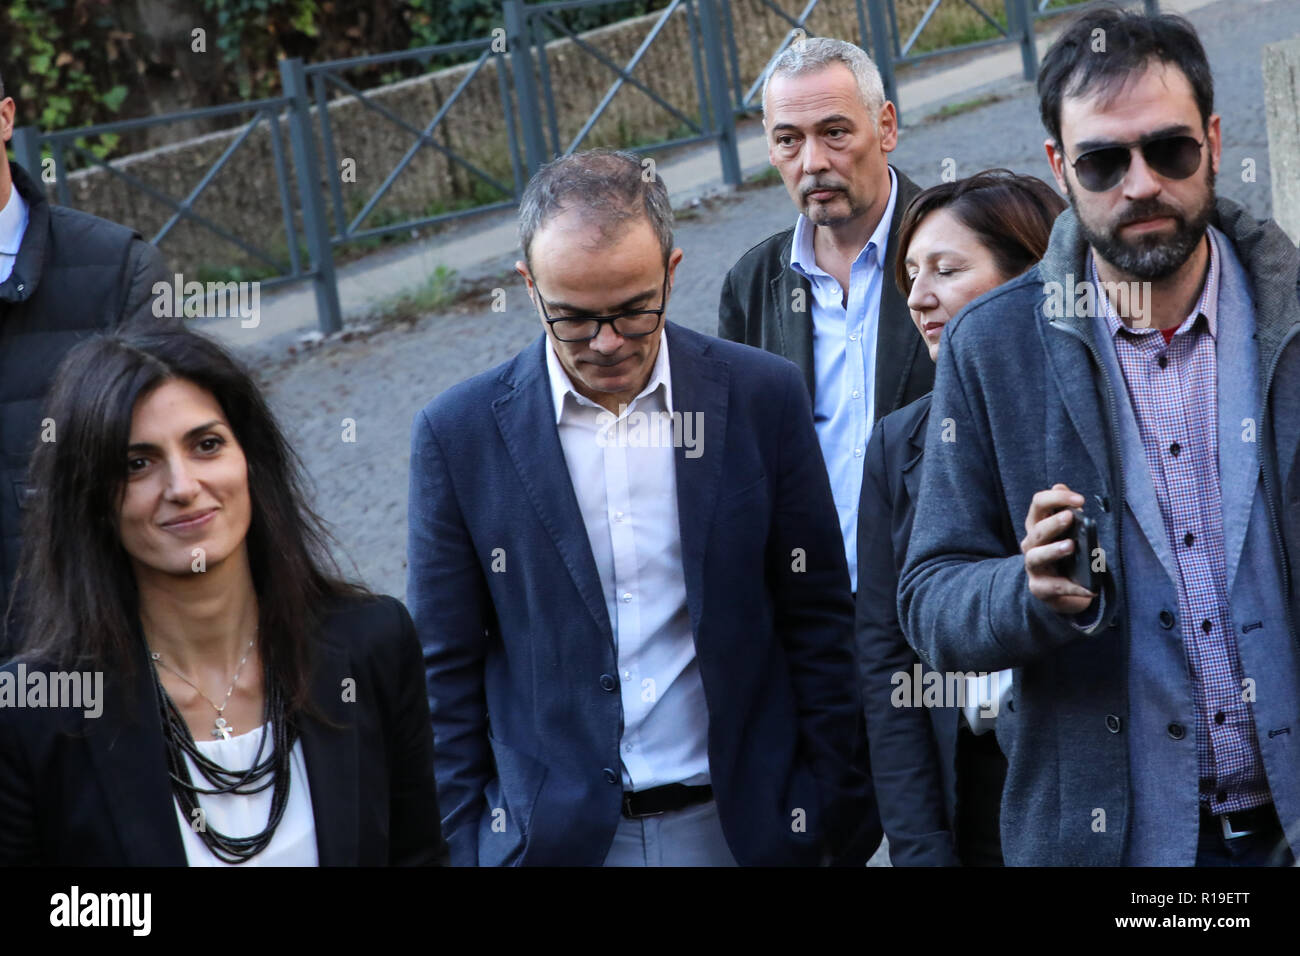 Mayor of Rome and member of the Five Star Movement (M5S), Virginia Raggi seen leaving the courthouse after being discharged of accusations of corrupt hiring practices. Rome's public prosecutor on Friday requested a ten-month jail term for Virginia Raggi, who became the city's first female mayor in 2016. Virginia Raggi was accused of making false statements regarding the appointment of Renato Marra as Rome's tourism chief. Stock Photo